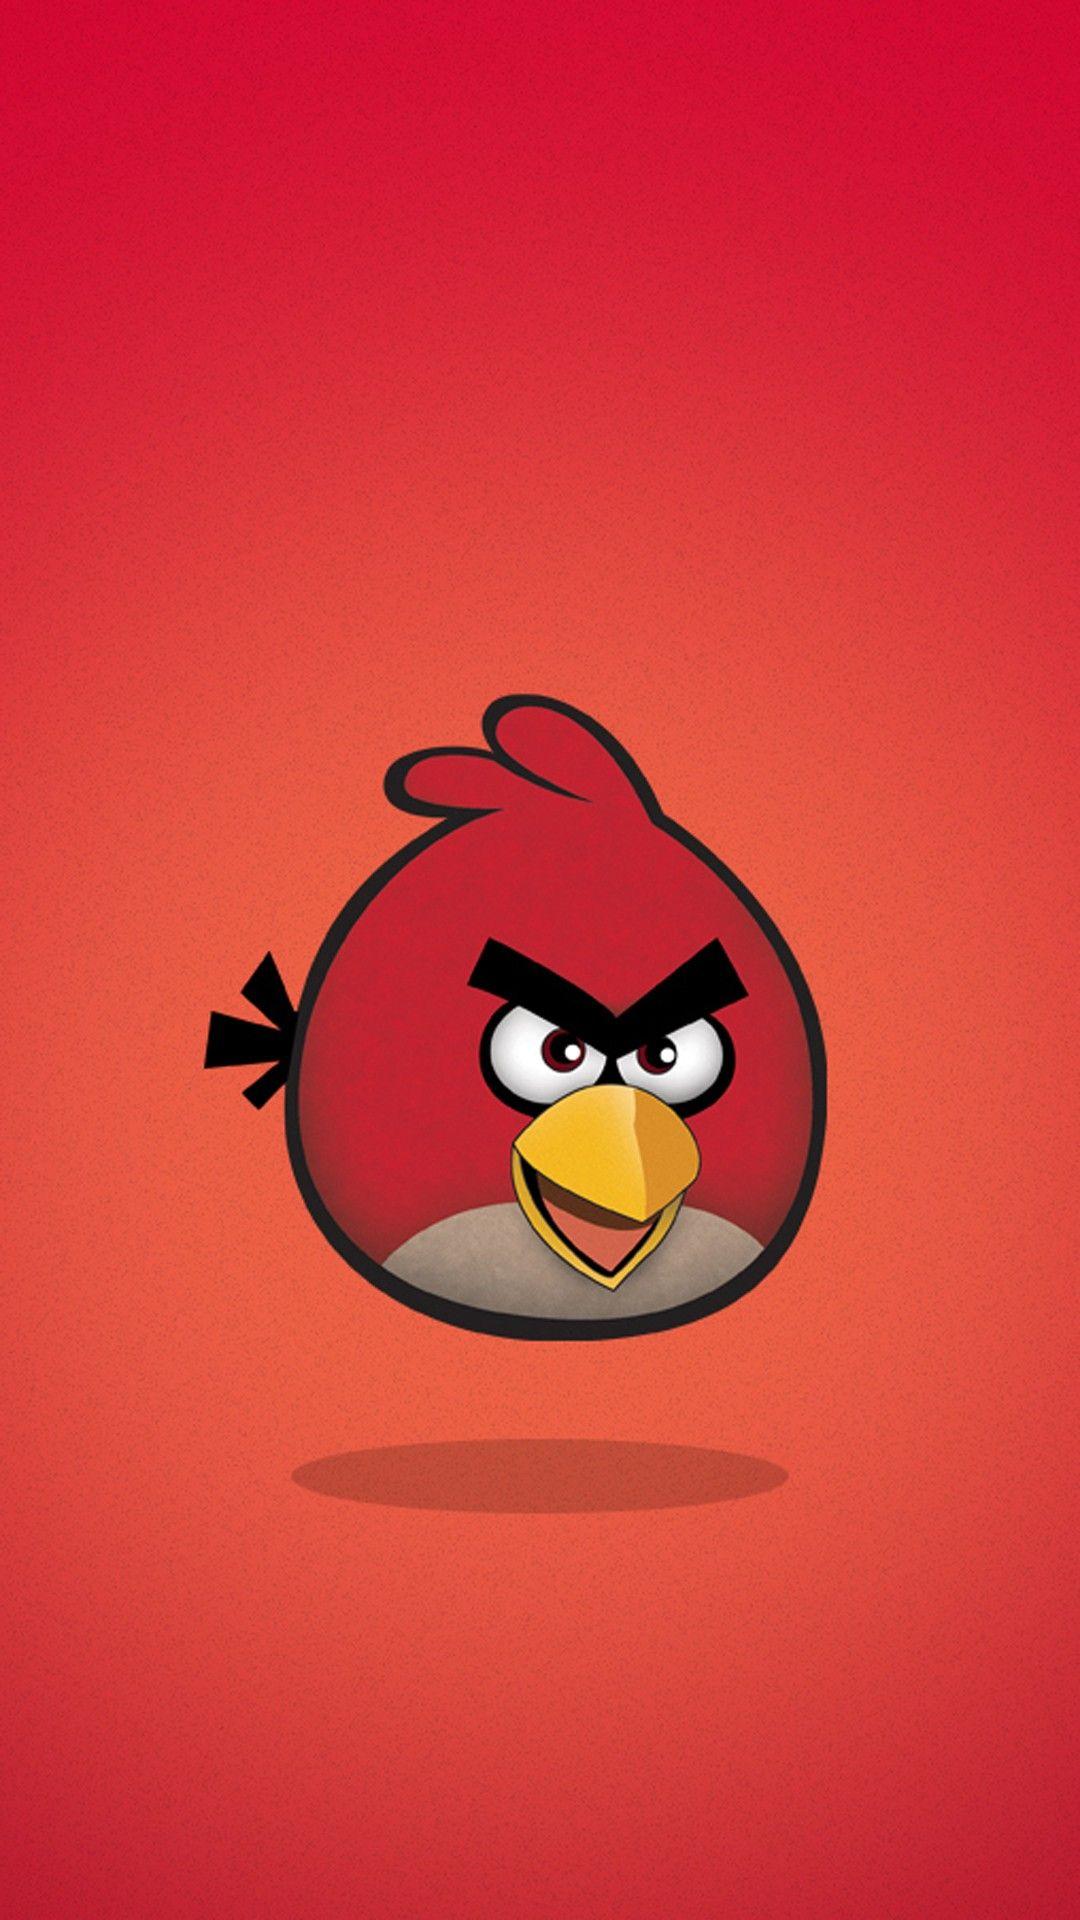 Angry Birds Video Game 2K wallpaper download